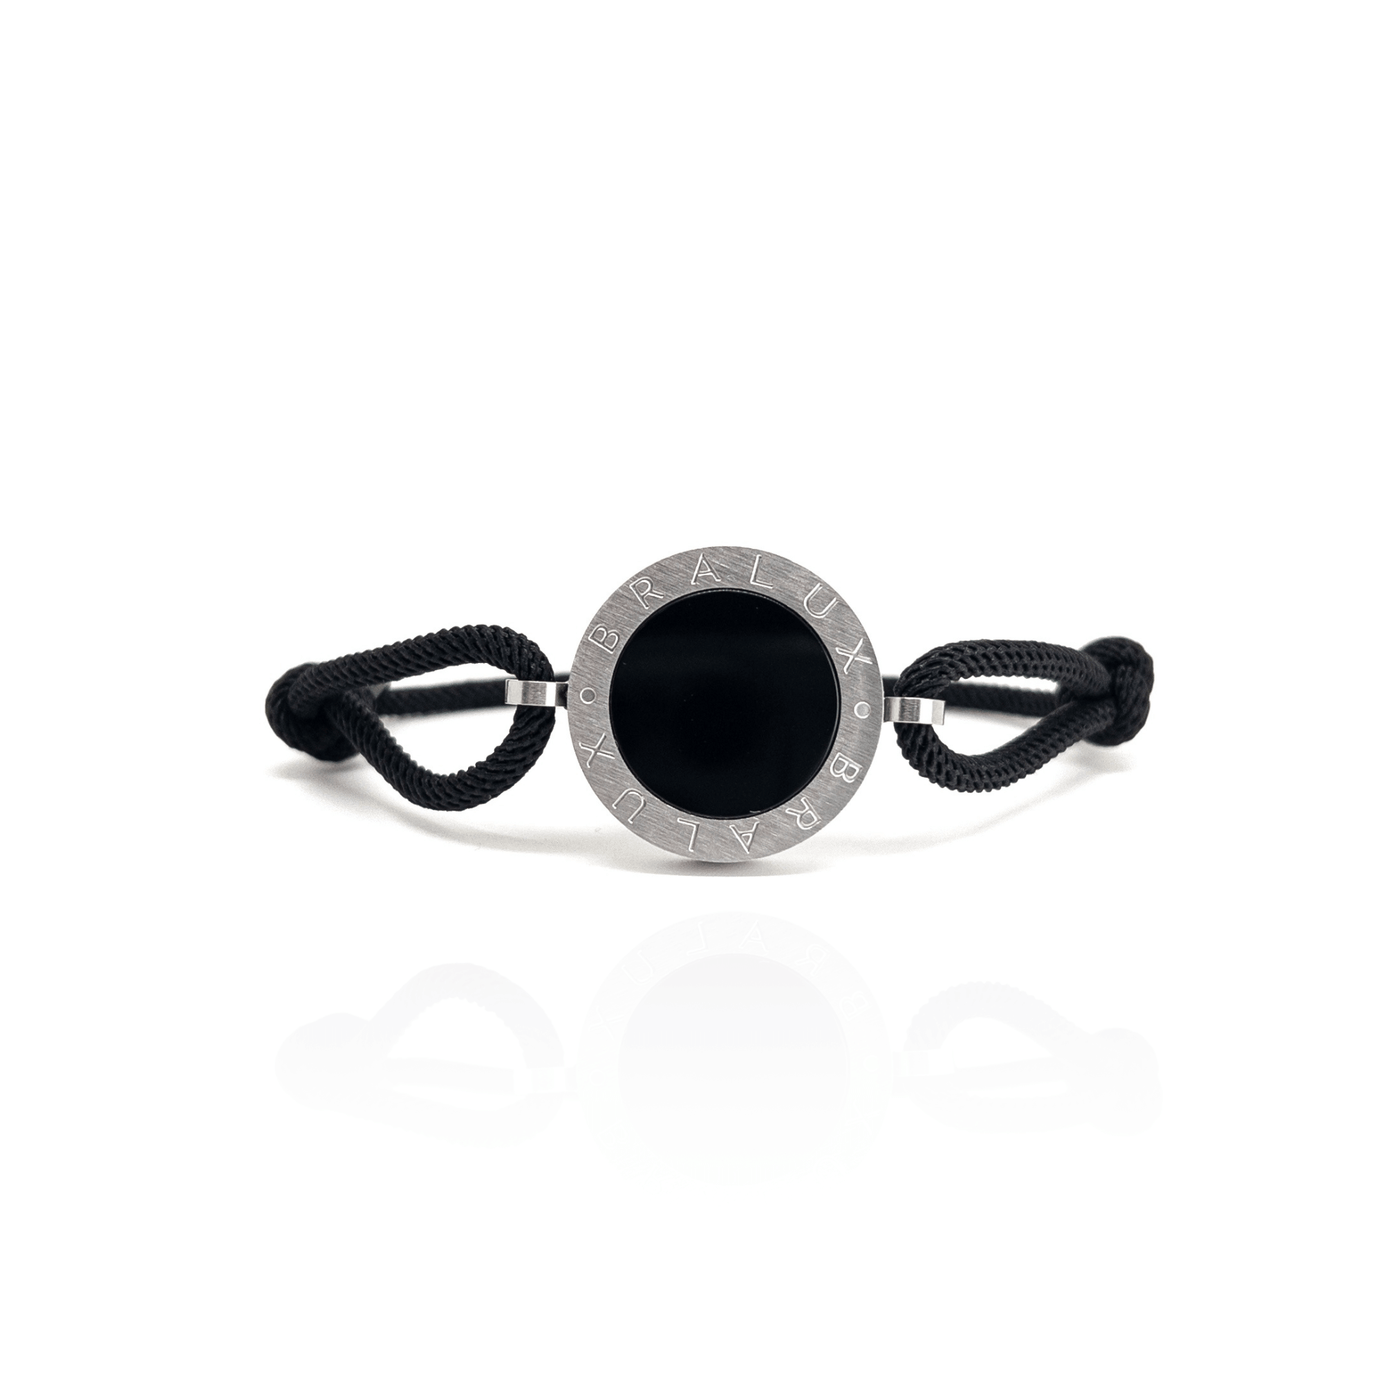 The Silver Plated Circle Onyx Bracelet